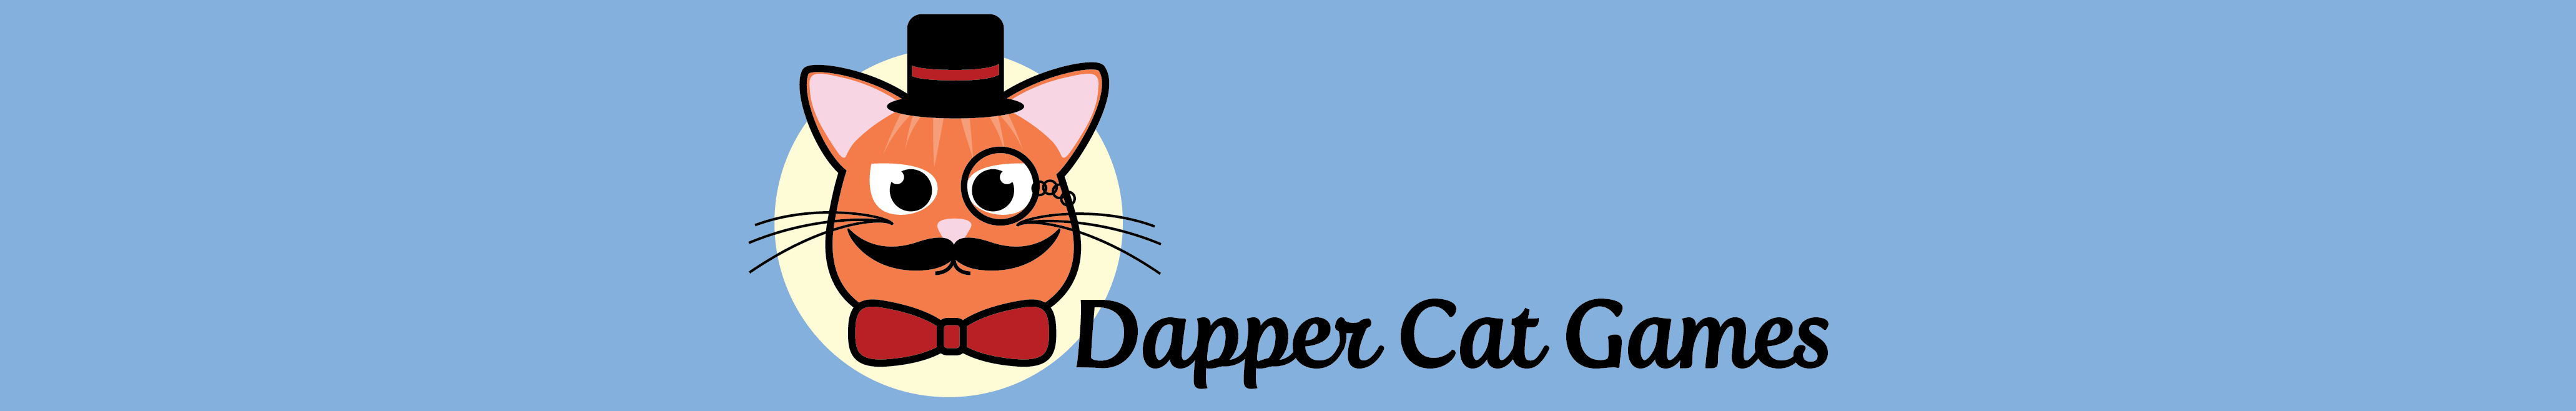 number-wizard-by-dapper-cat-games